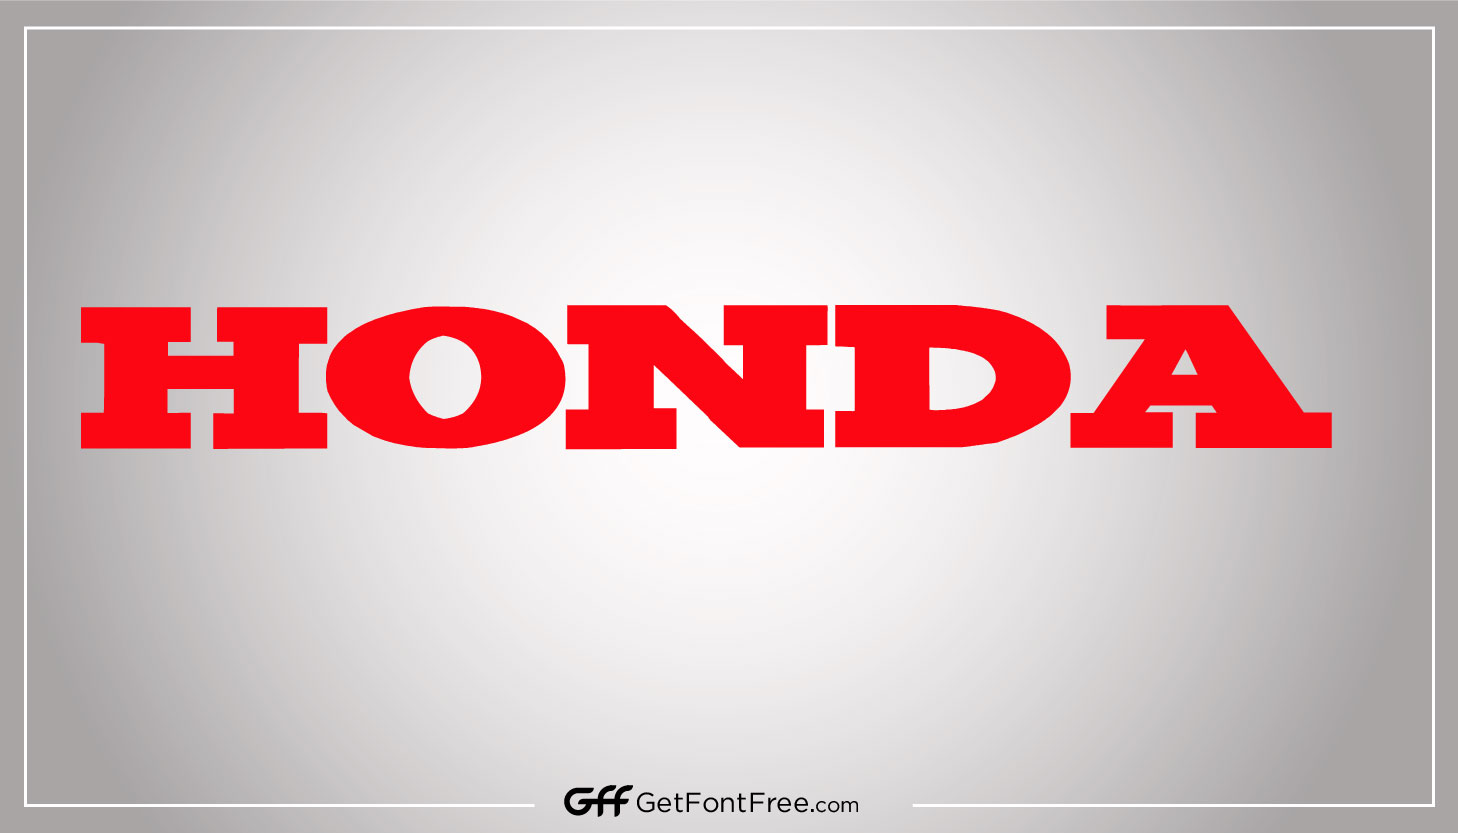 Honda Font a new logo typeface called Honda Logo Font was created by Sharkshock. It was created using the design of the Honda corporation logo. It works best for developing remarkable and distinctive characteristics. 52 different glyphs make up more than 250 characters in this elegant design.